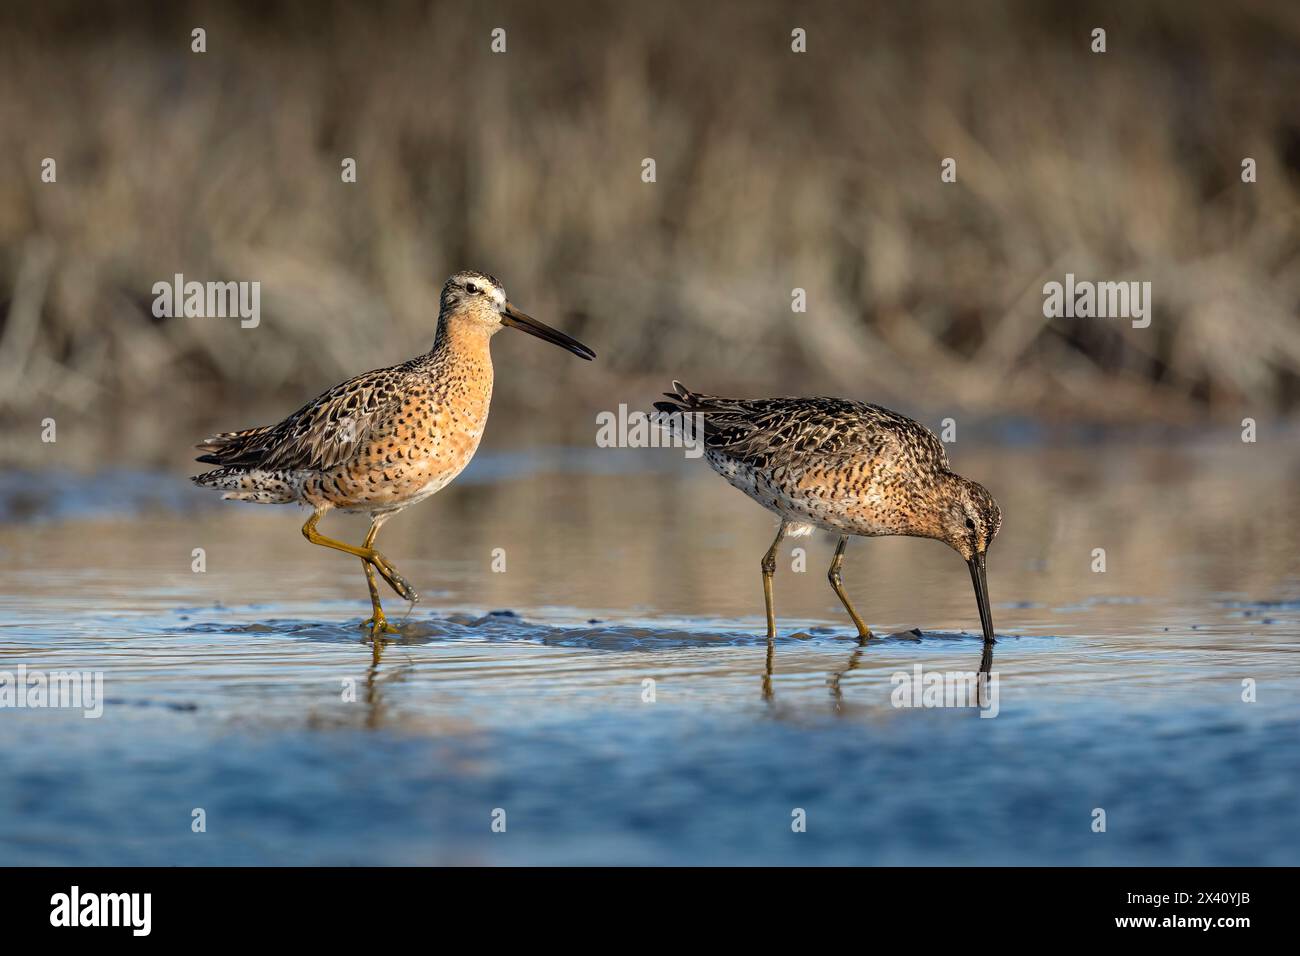 Pair of Short-billed dowitchers (Limnodromus griseus) feed on invertebrates by using their bills to probe the mud of Southcentral Alaska's Susitna ... Stock Photo